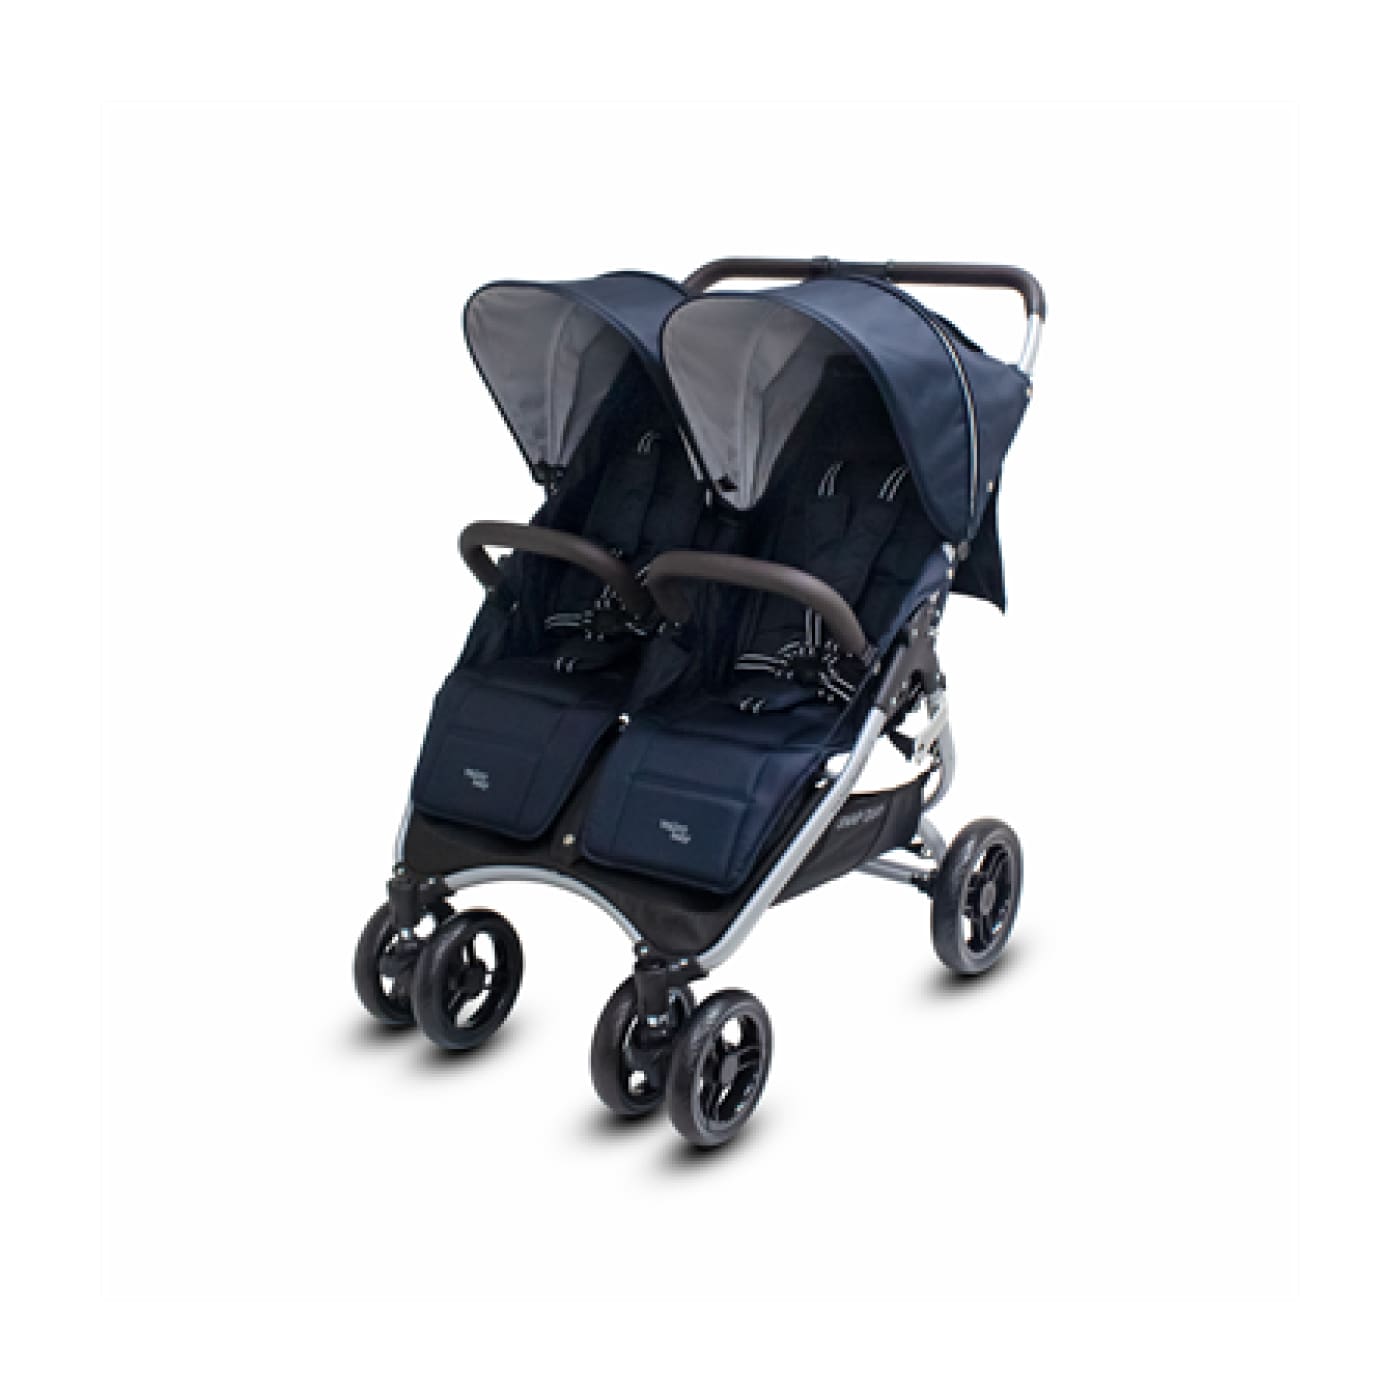 Valco Baby Snap Duo Stroller - Navy - Navy - PRAMS & STROLLERS - TWIN/TANDEM TSC